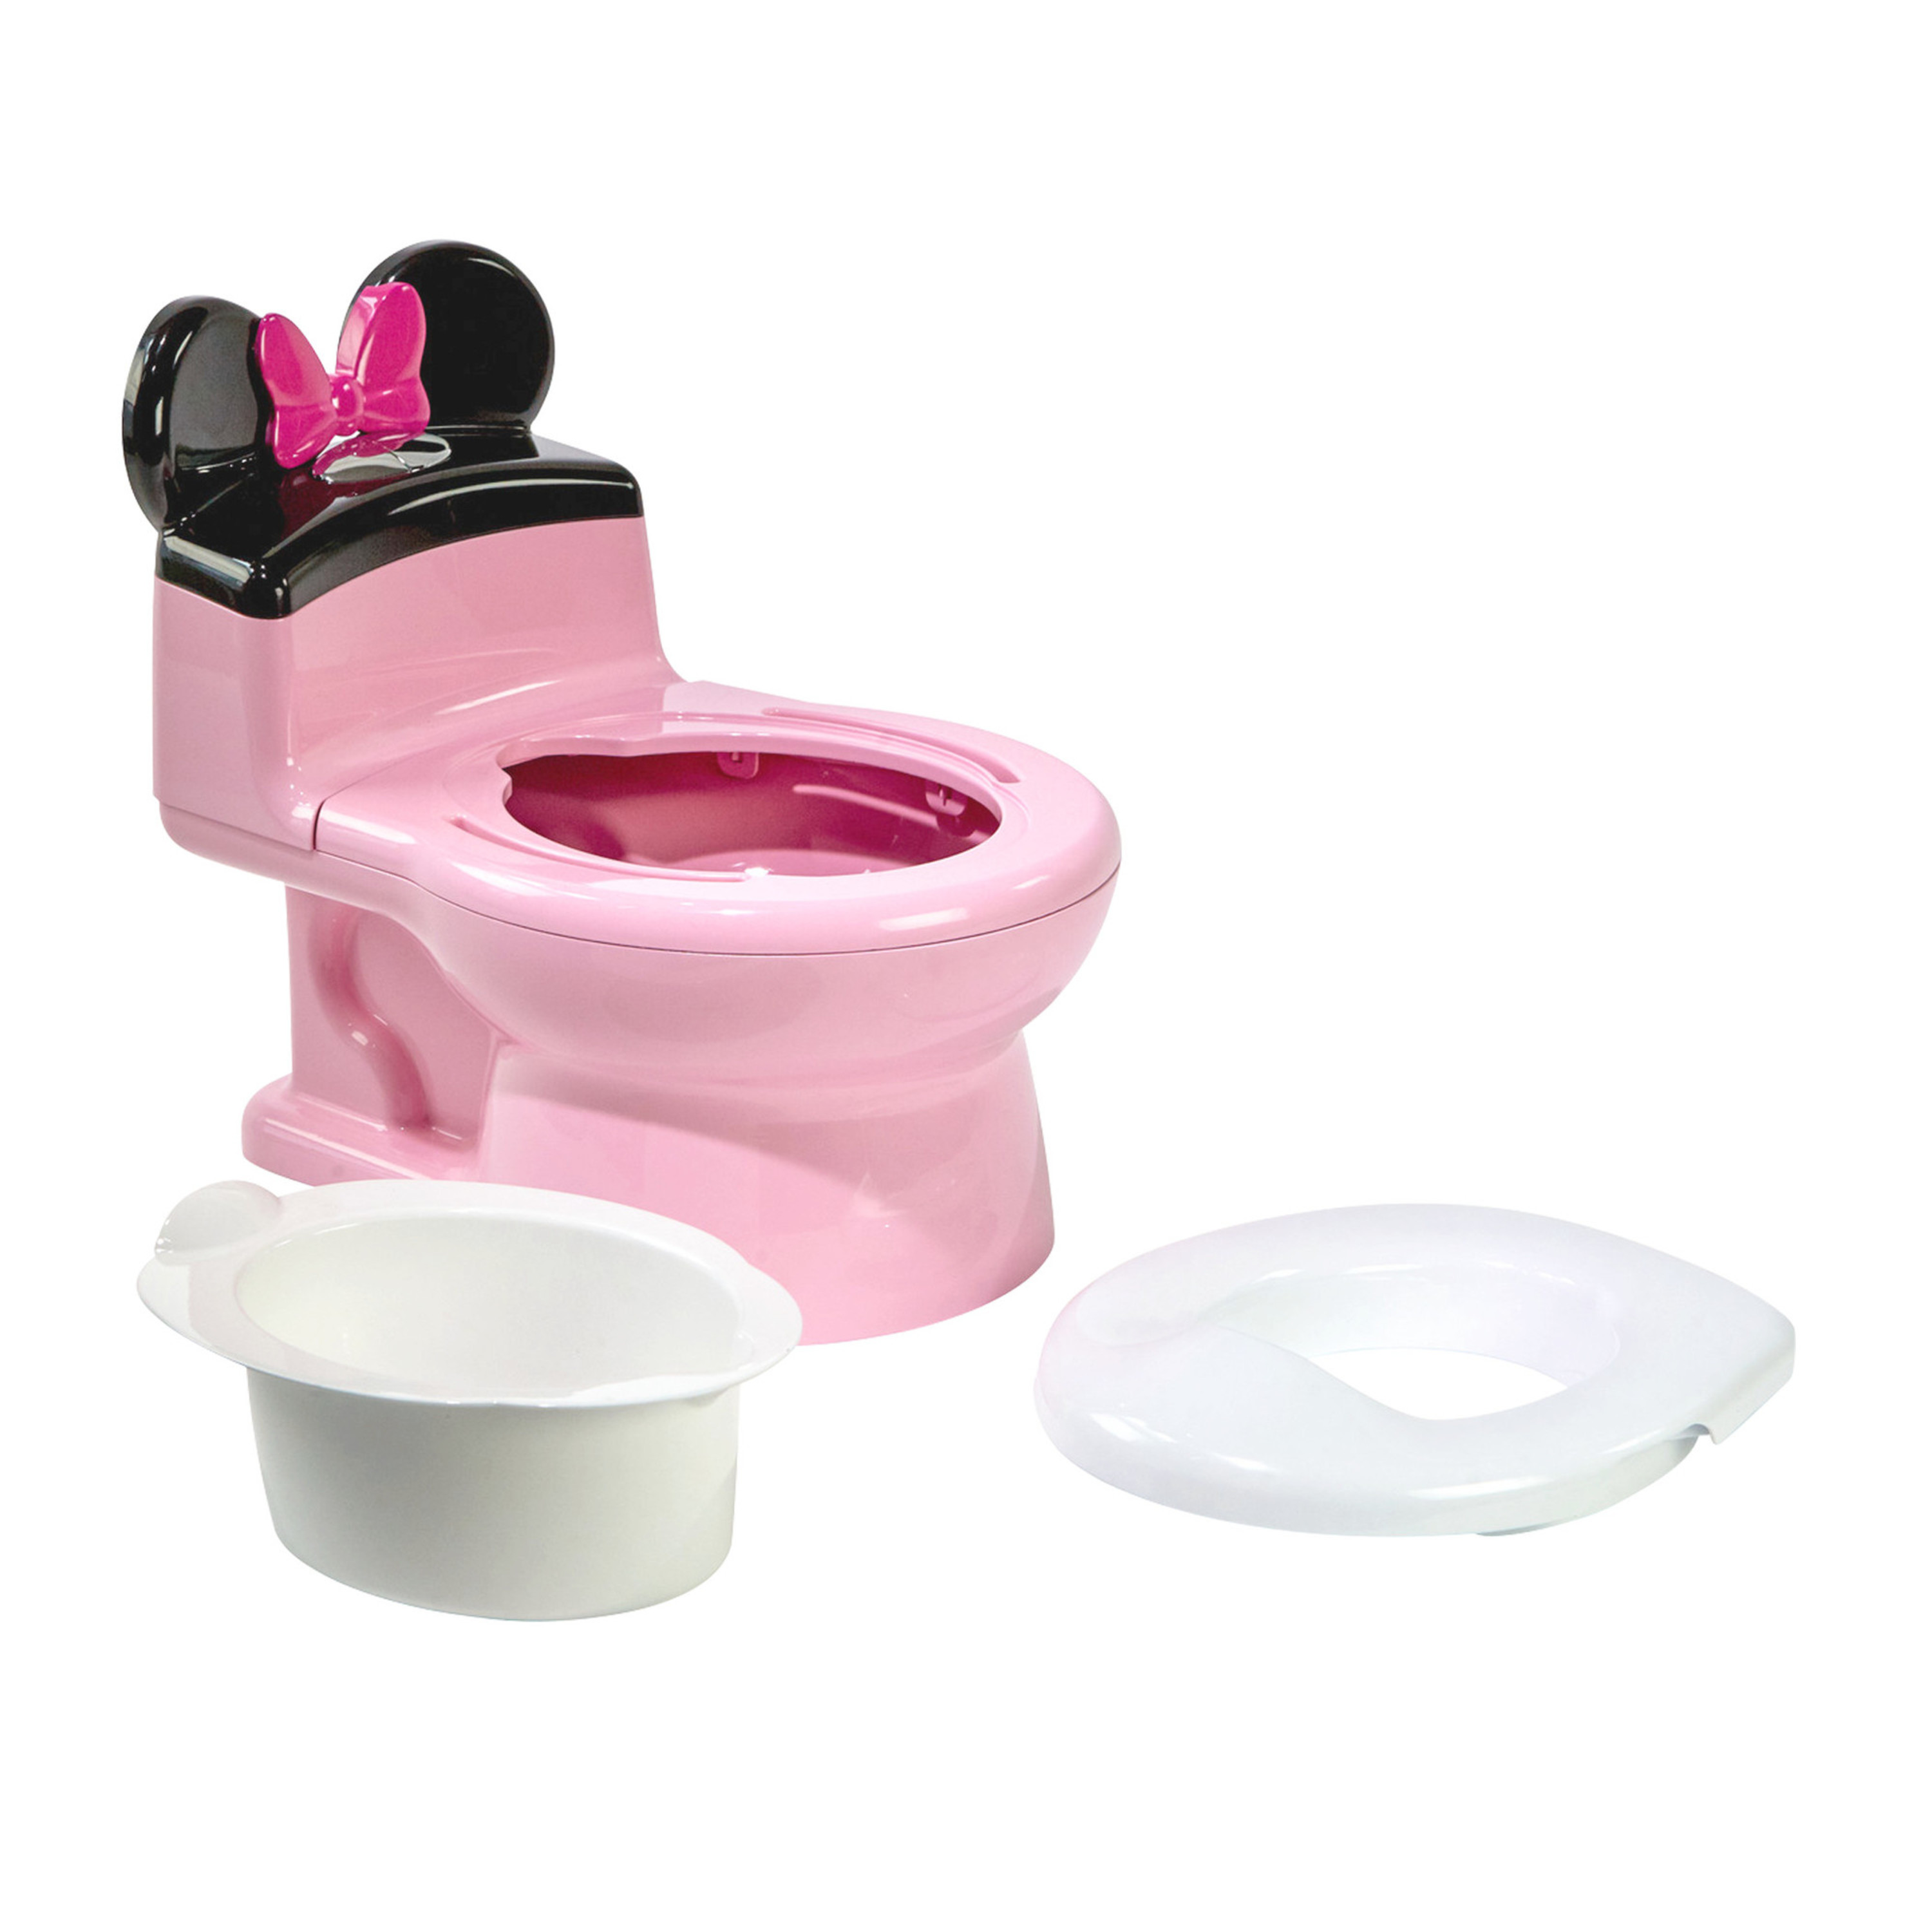 The First Years Disney Minnie Mouse 2-in-1 Potty Training Toilet, Toddler Toilet and Training Seat - image 5 of 9